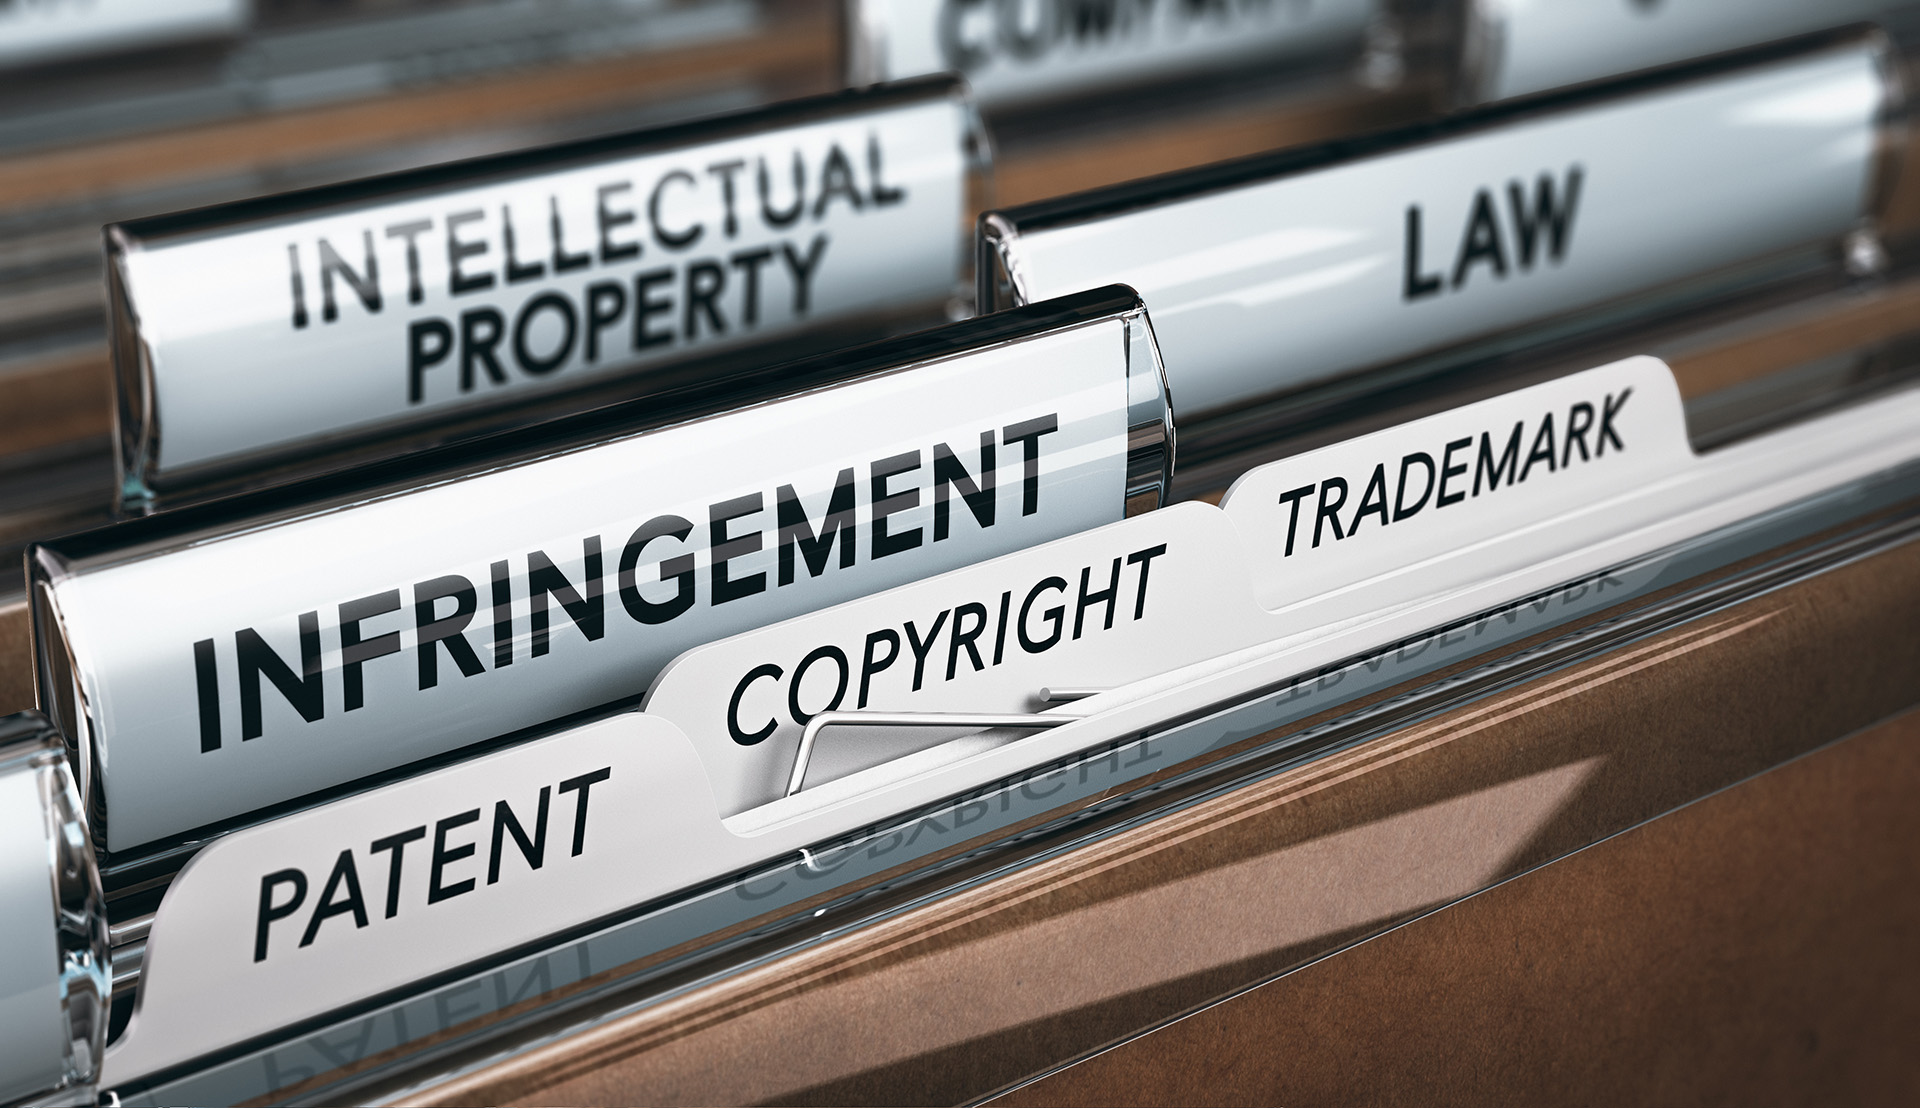 Your intellectual property has value